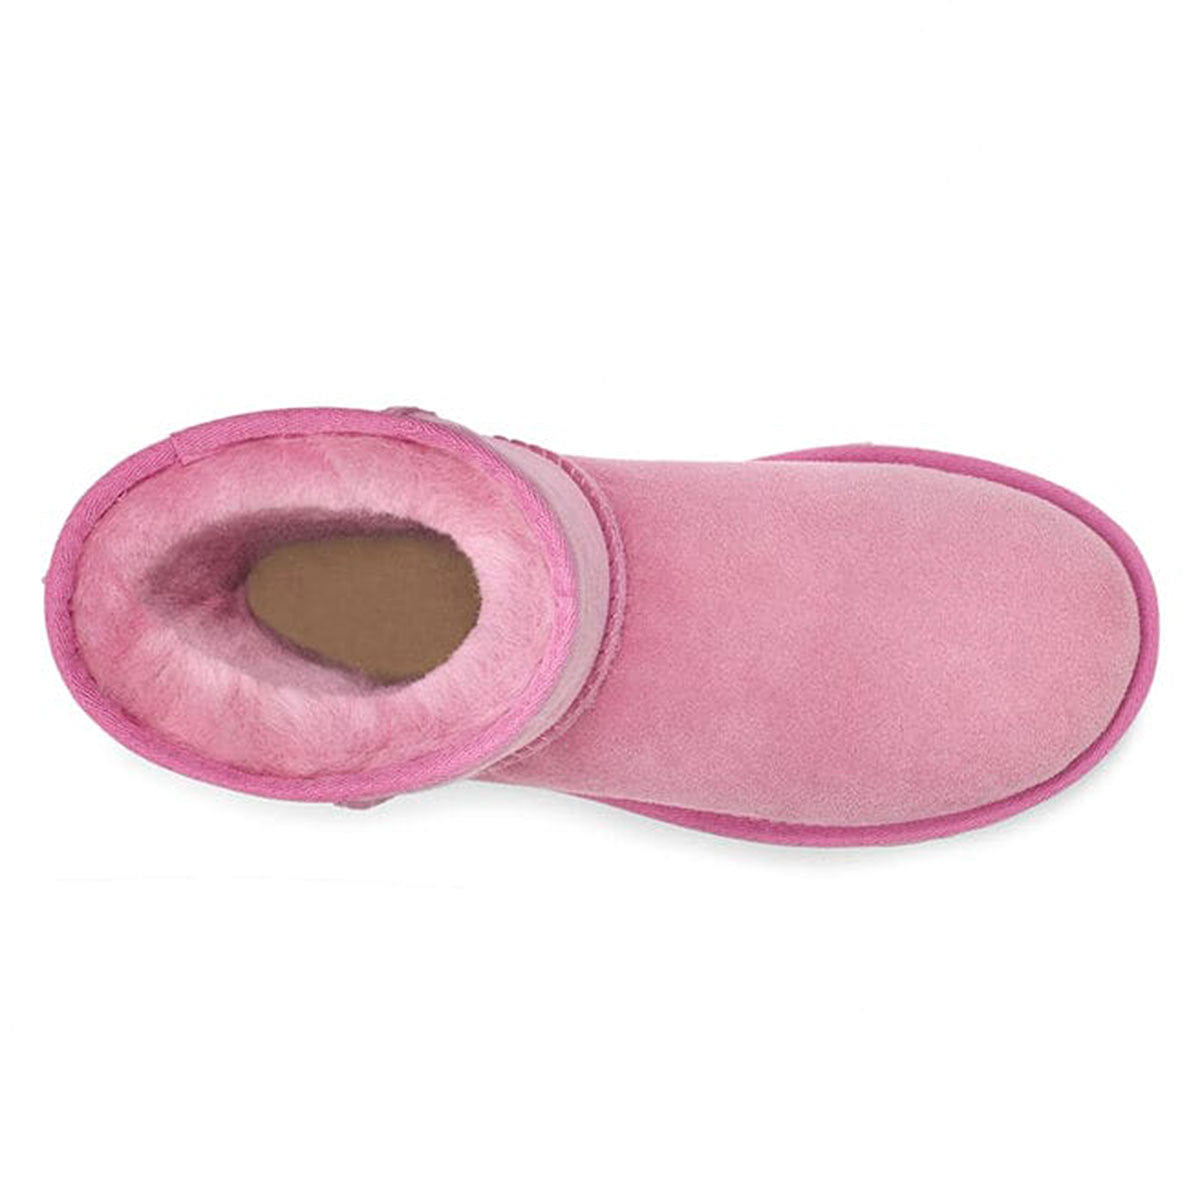 A single pink UGG Classic Short II Wild Berry slipper with a soft Twinface sheepskin lining viewed from above.